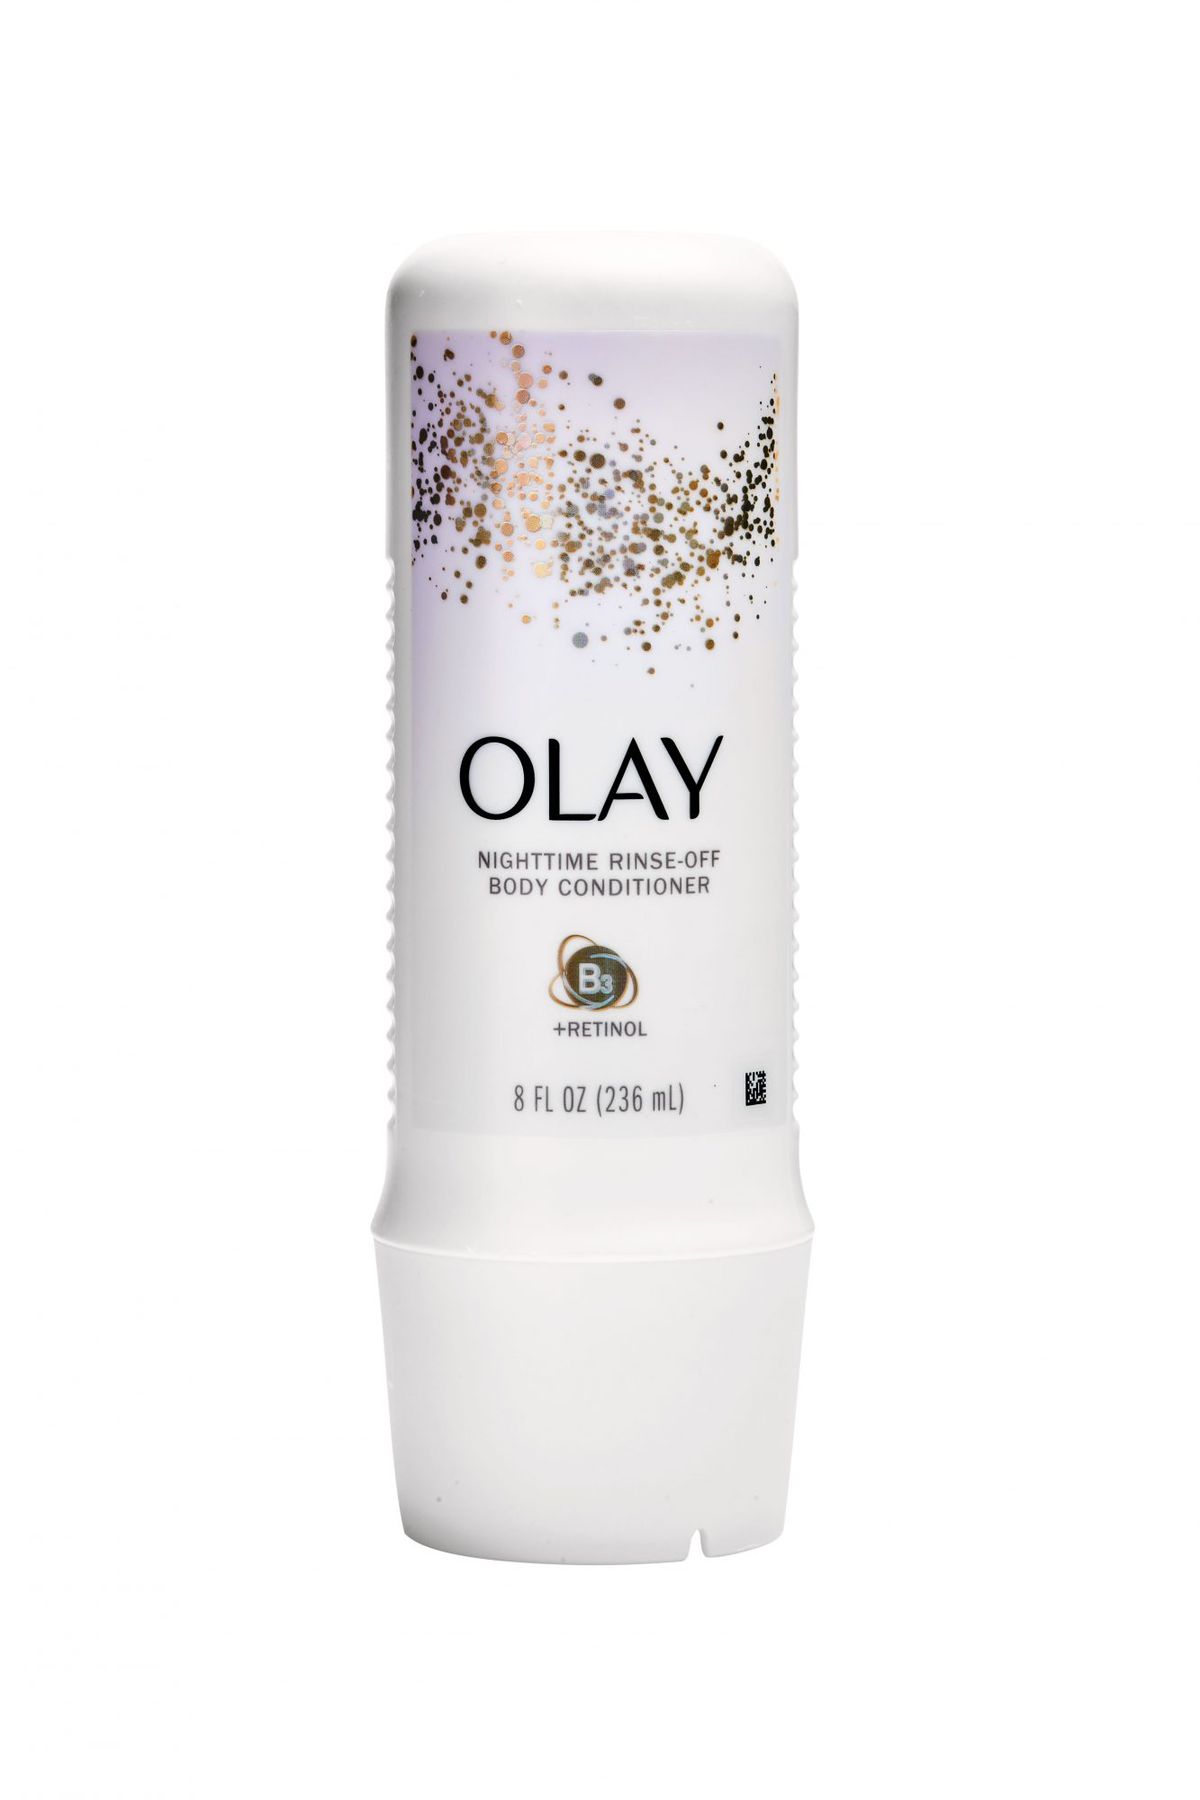 Olay Nighttime Rinse-Off Body Conditioner